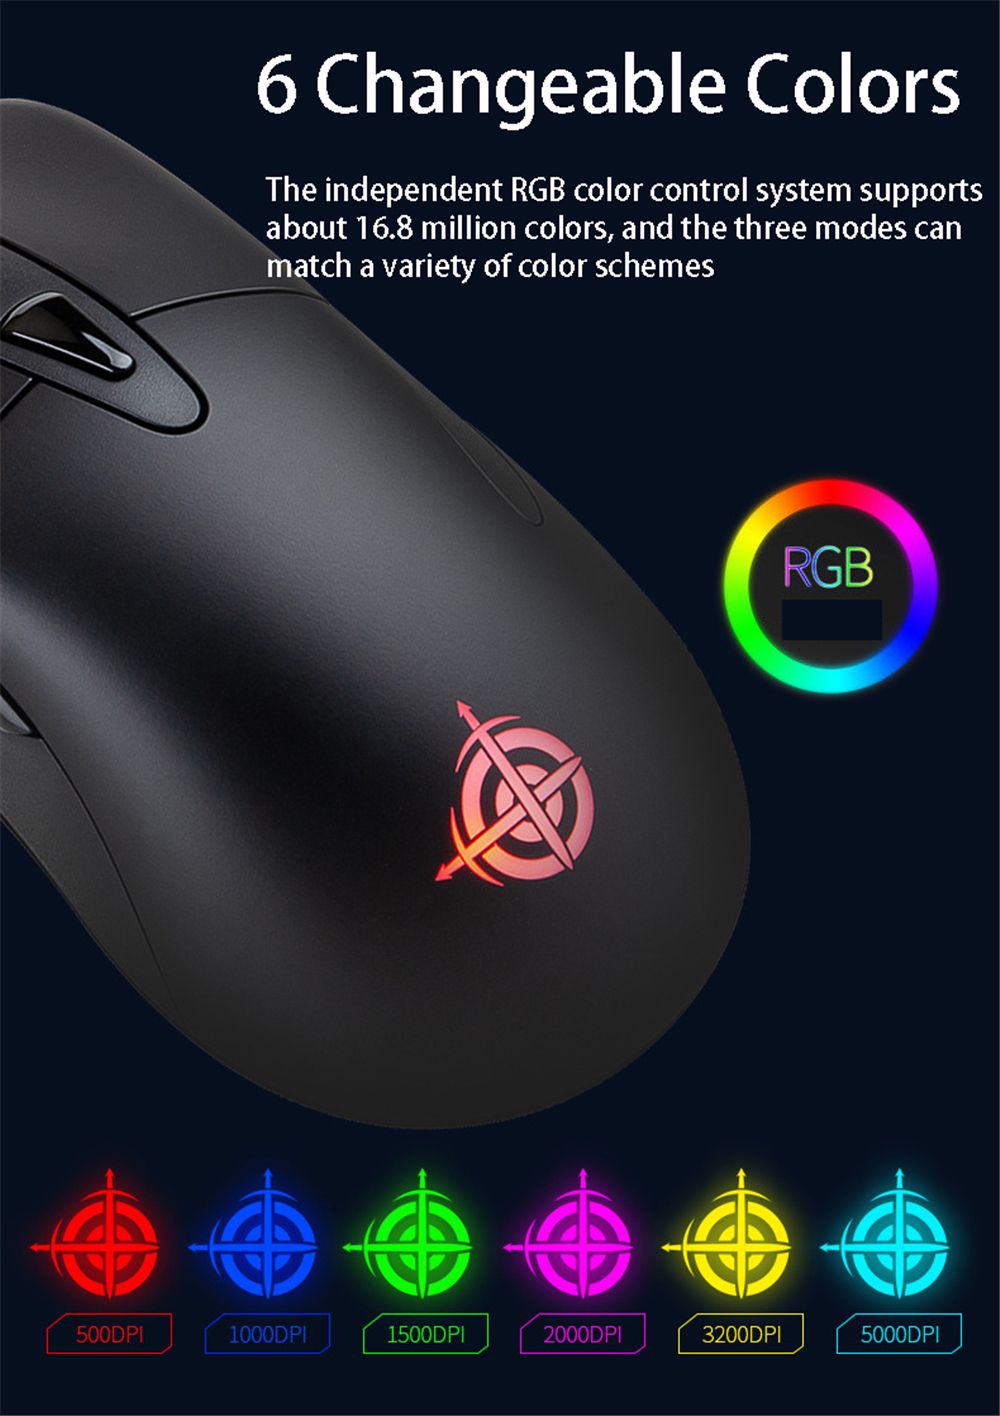 MAGIC-REFINER-MG12-Wired-Gaming-Mouse-6-Buttons-5000-DPI-Adjust-Programmable-RGB-Backlit-Optical-Mou-1749736